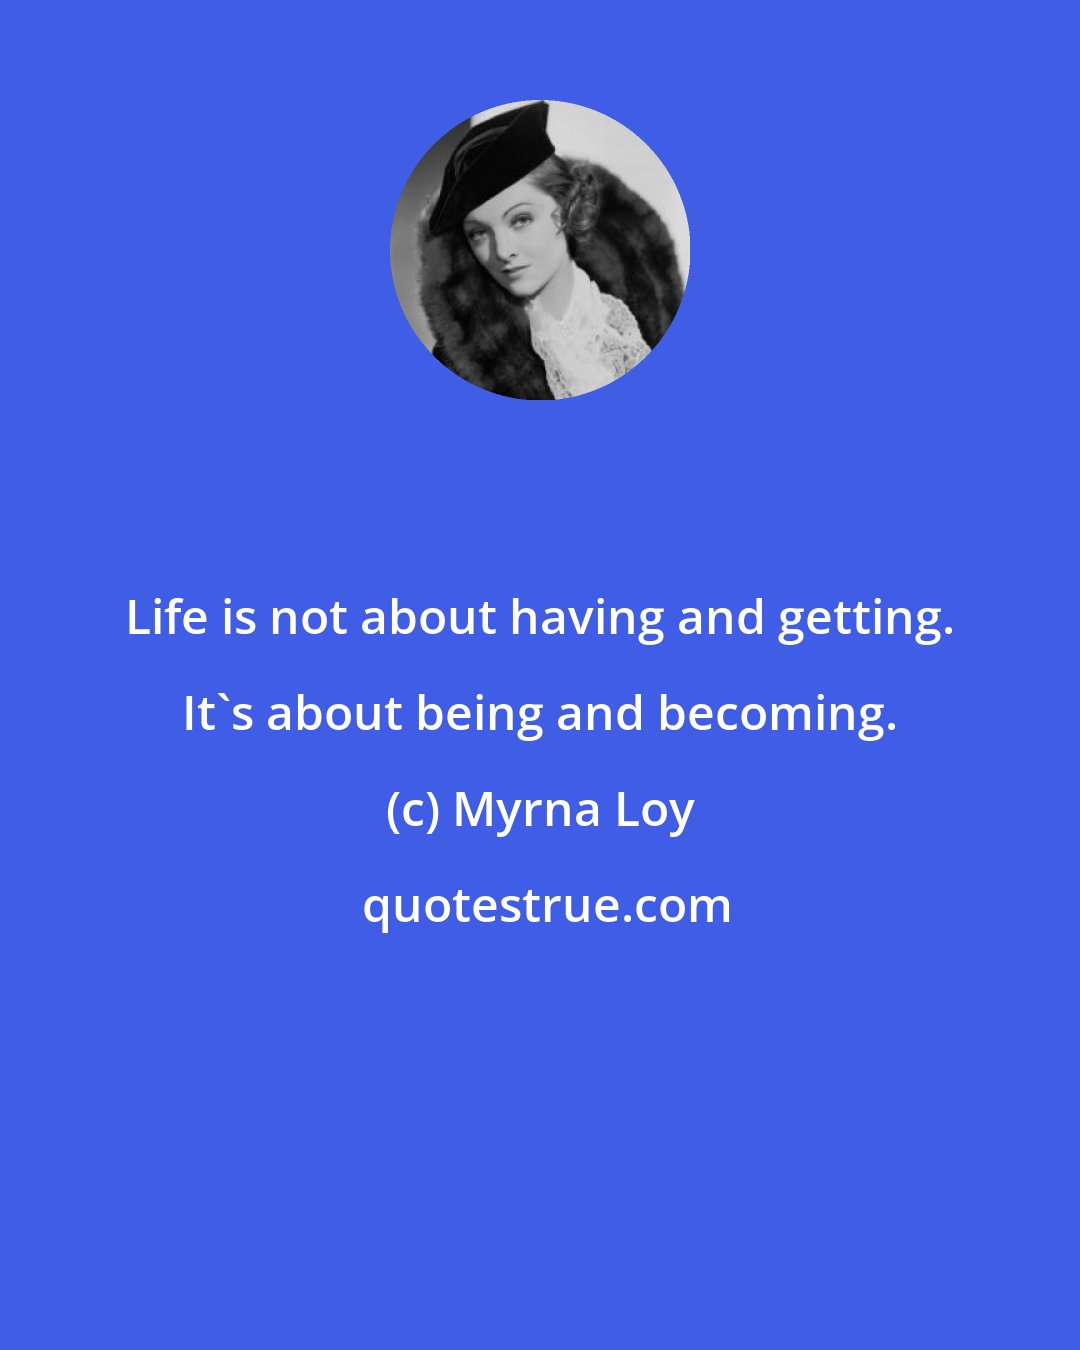 Myrna Loy: Life is not about having and getting. It's about being and becoming.